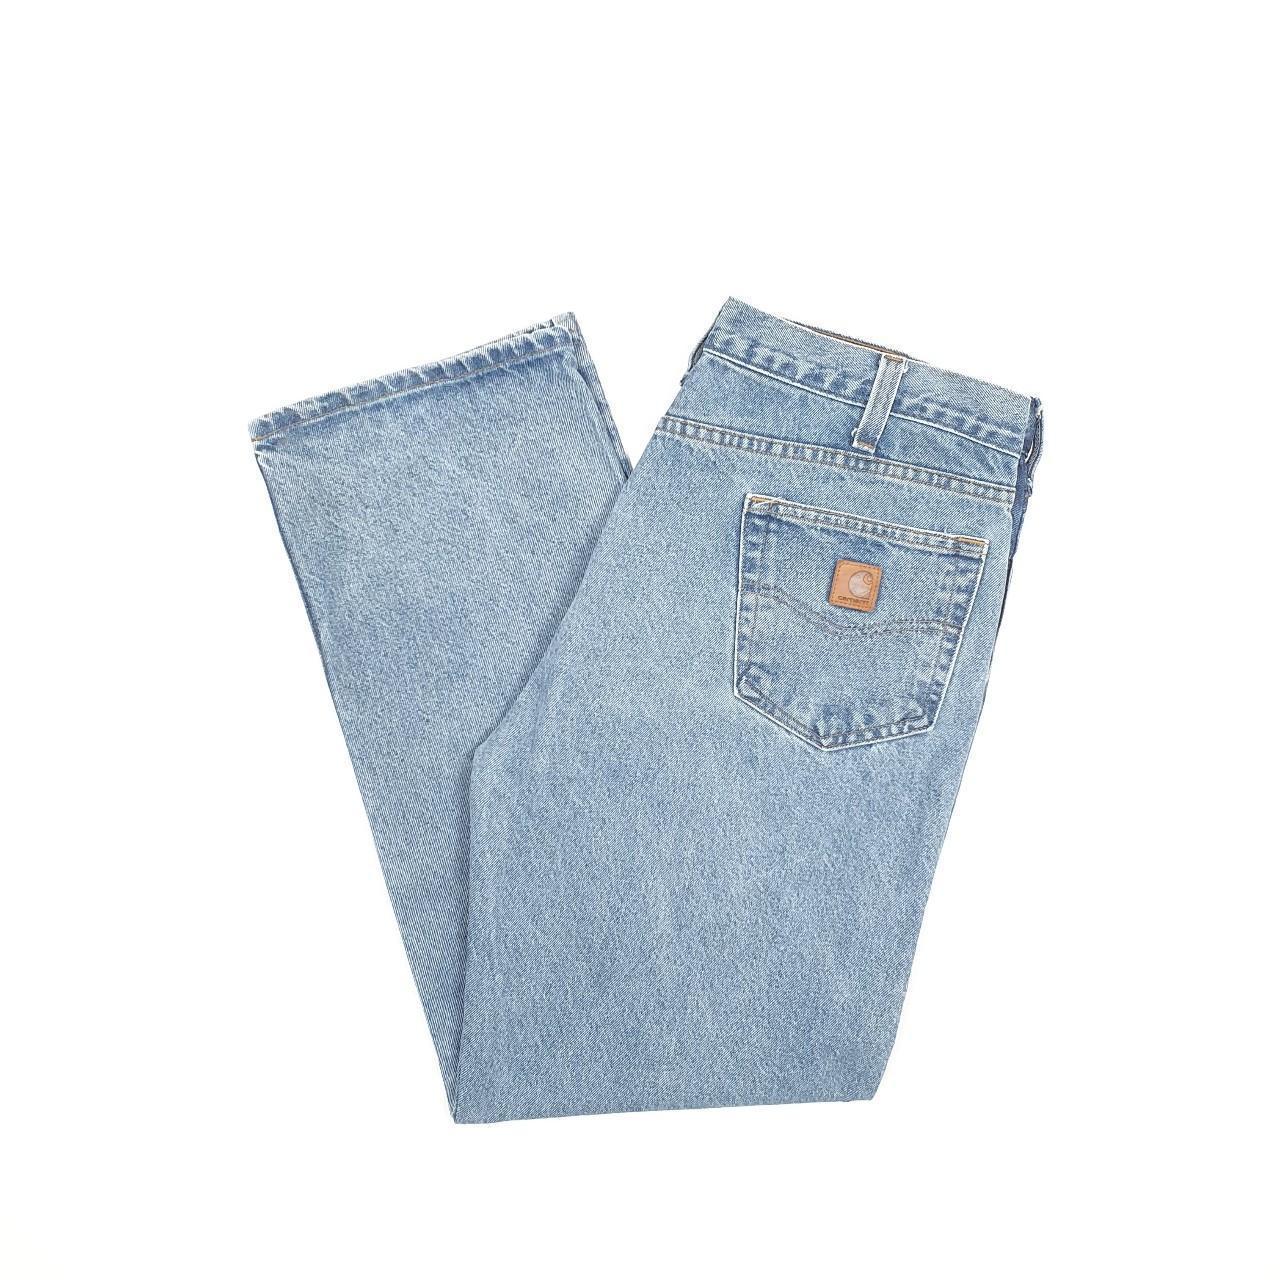 6505 Mens Carhartt Relaxed Fit Jeans Please check... - Depop